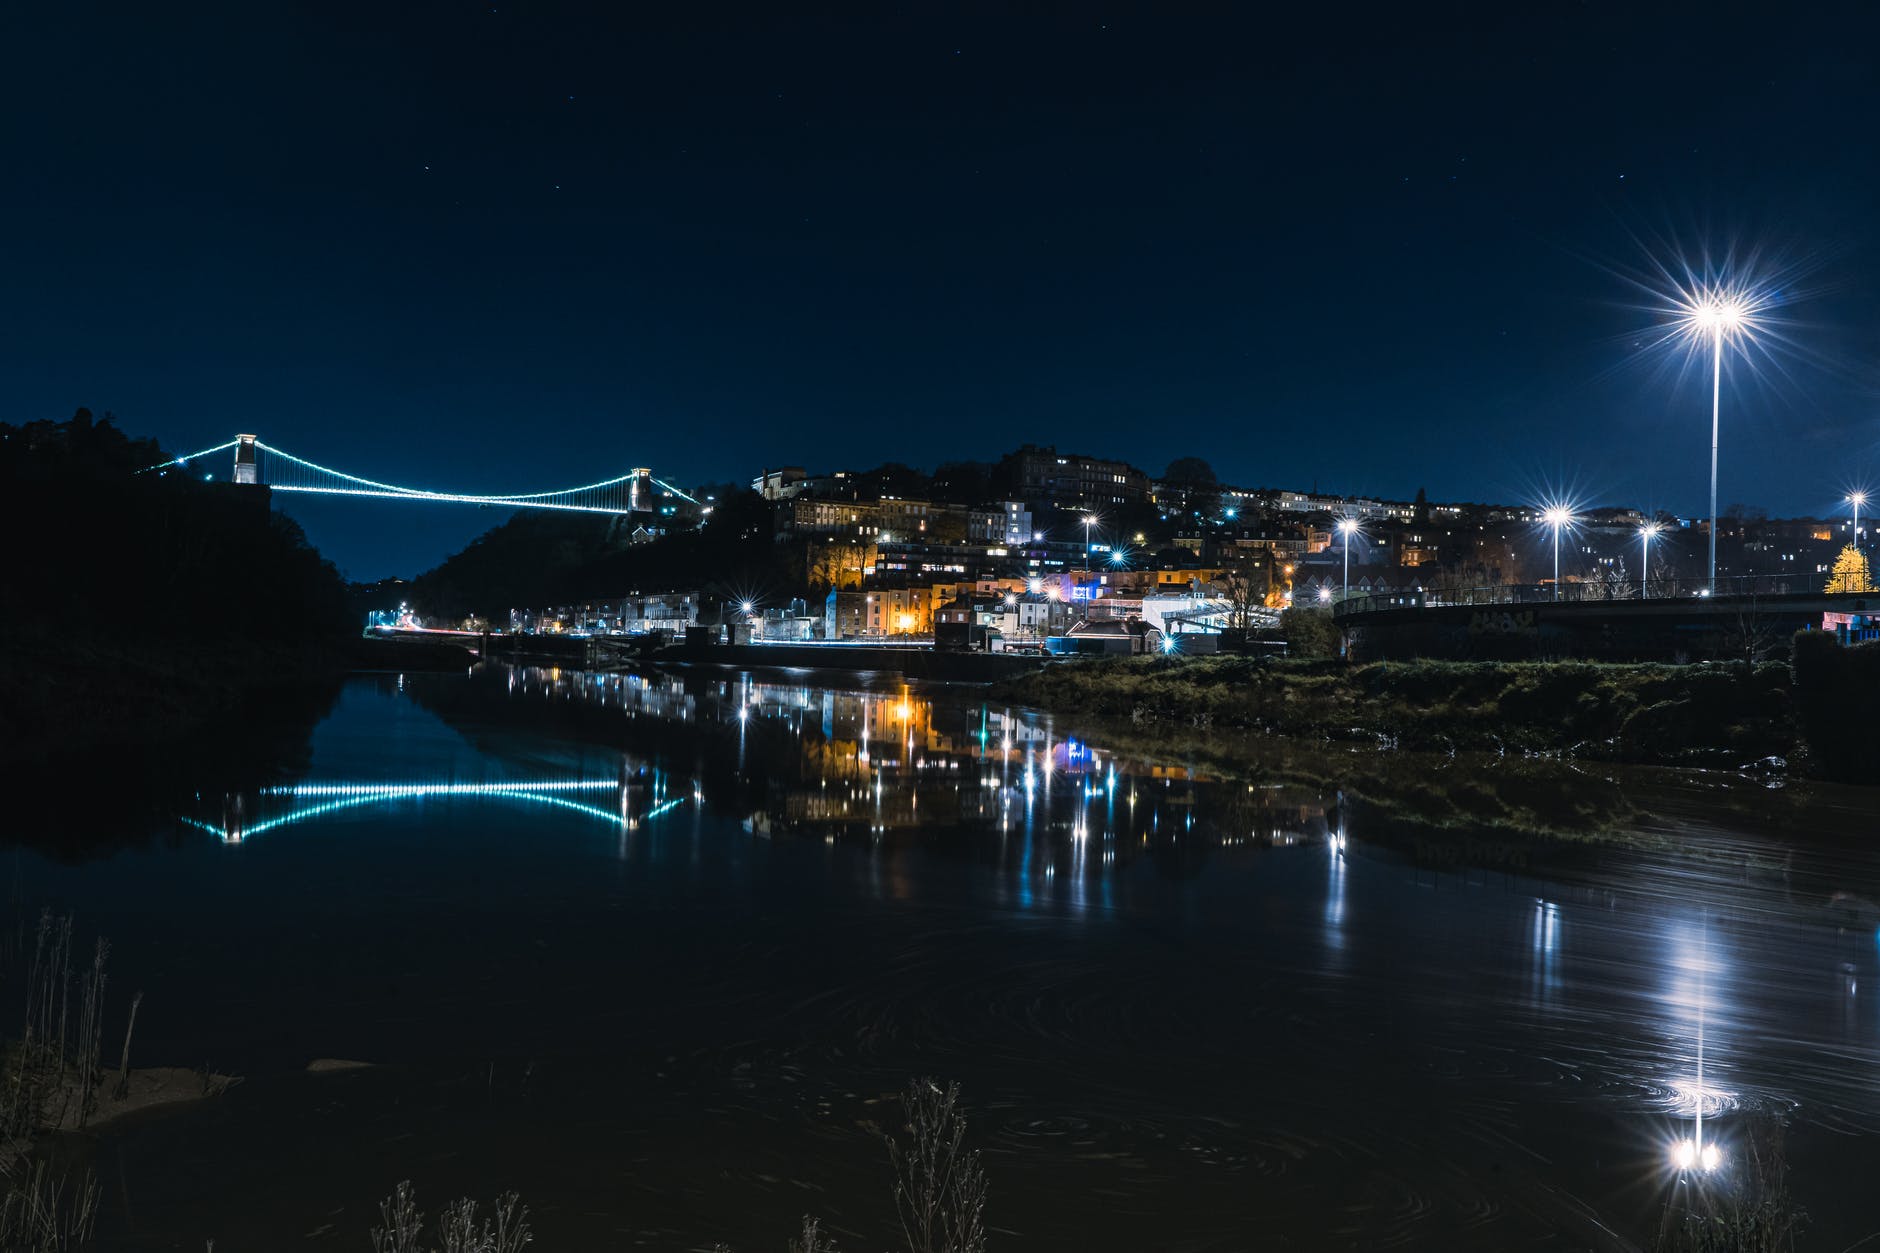 reflection of clifton suspension bridge on water